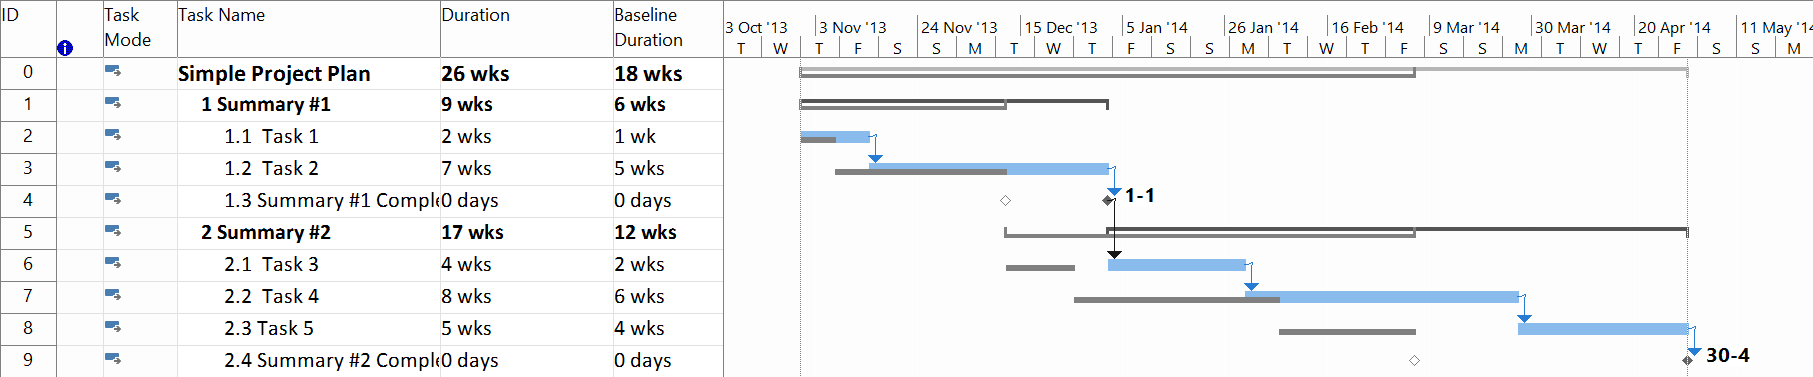 Picture of a schedule with a baseline